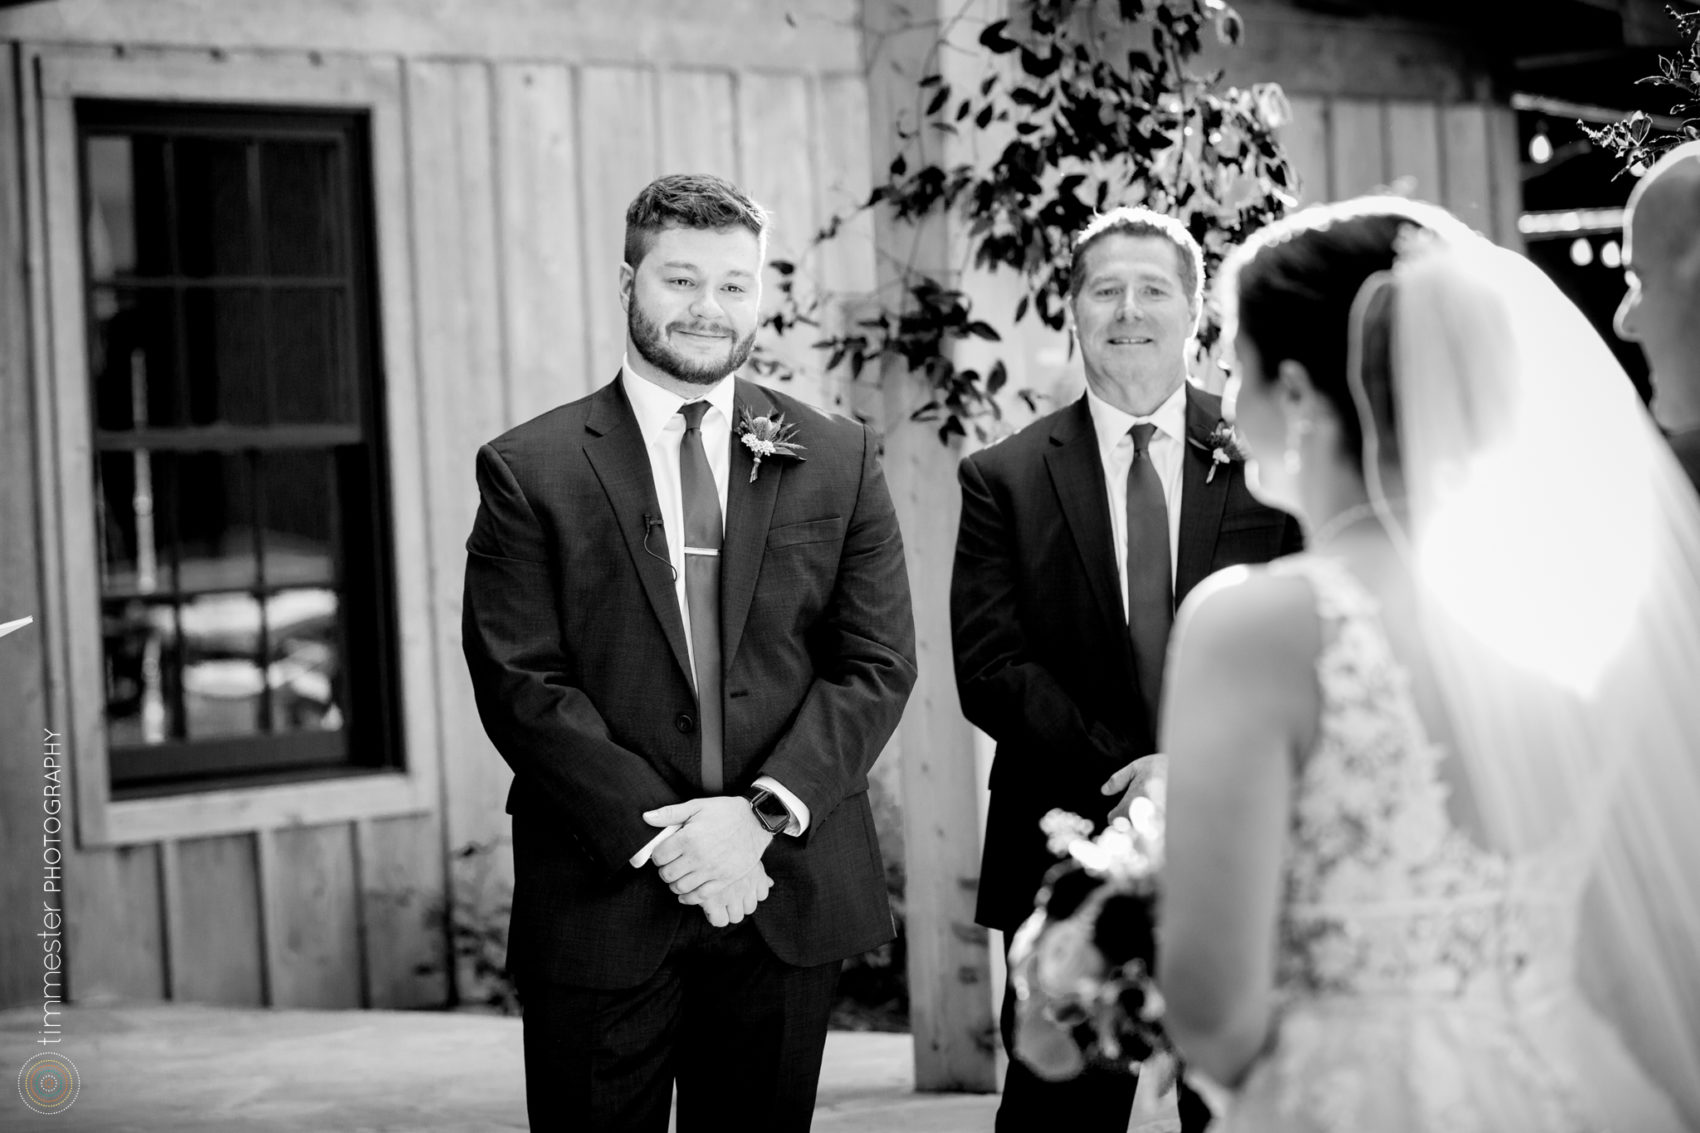 The groom's reaction to the bride during a ceremony at Dorsett House, Rivers & Bridges